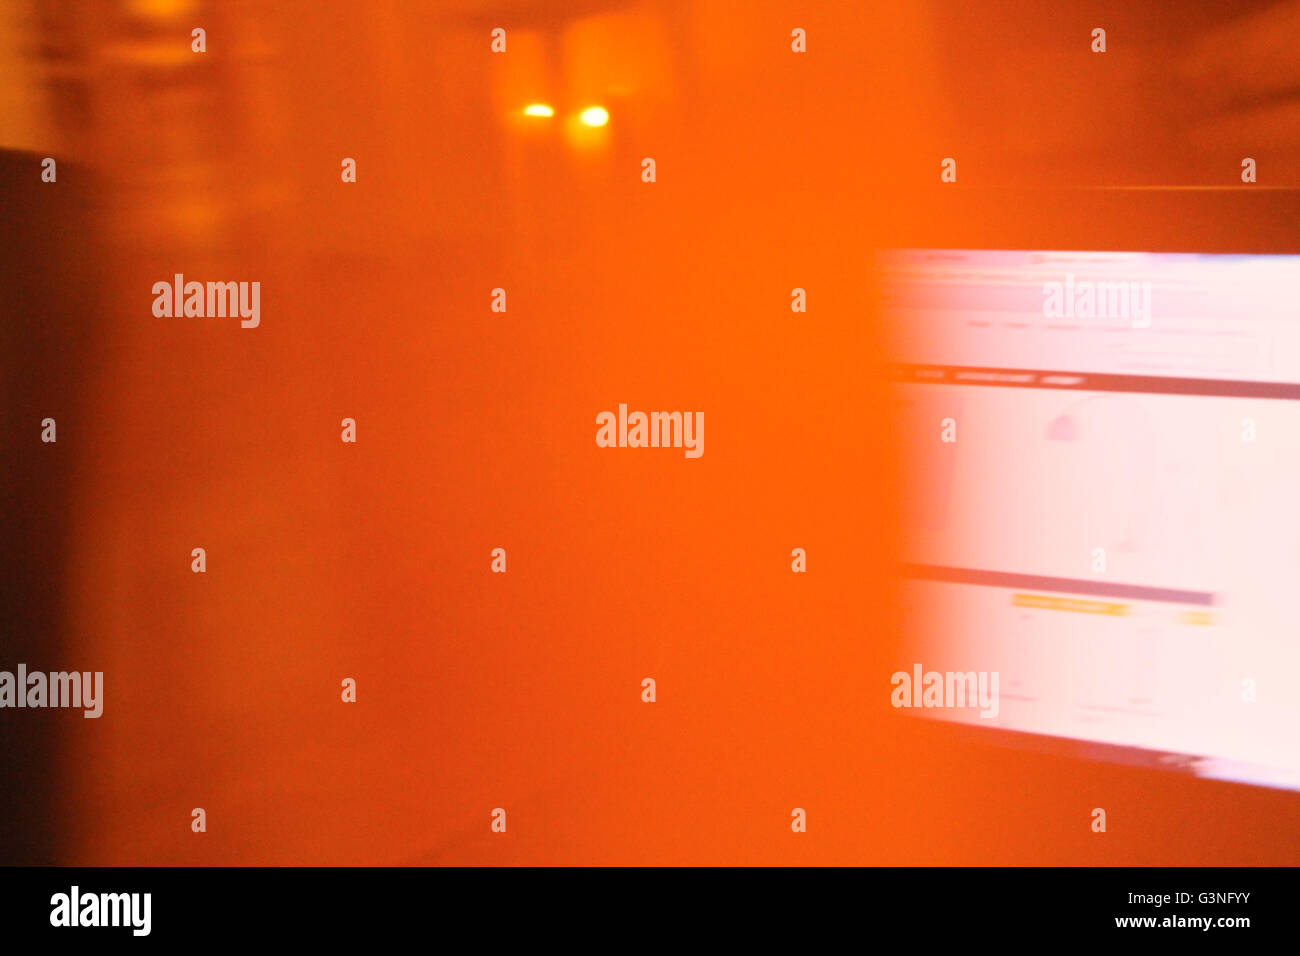 Computer screen with light in background, moving camera and blurred orange Stock Photo